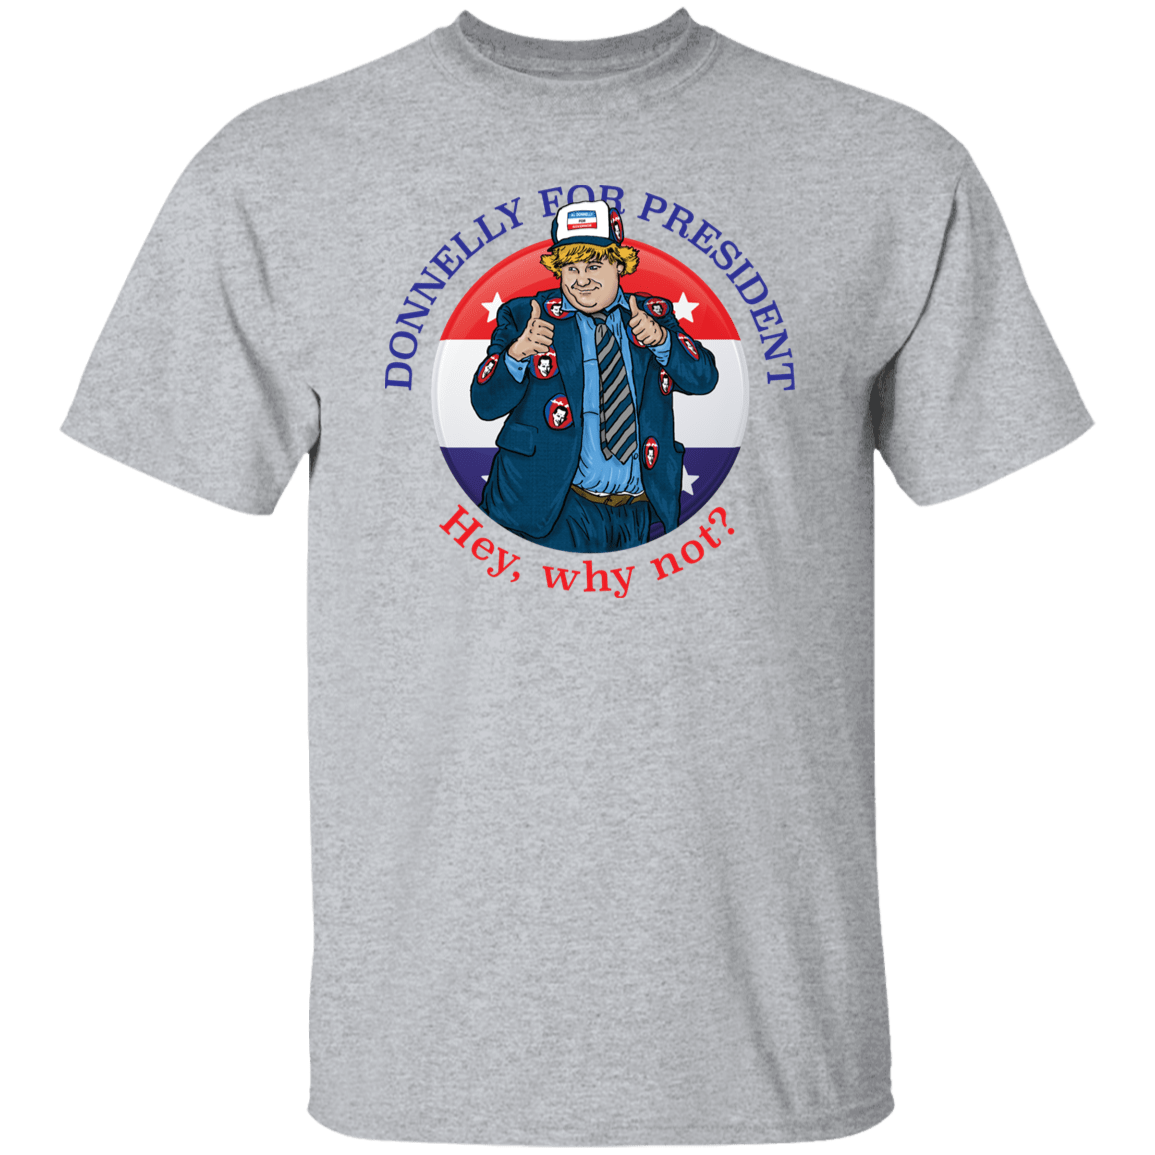 T-Shirts Sport Grey / S Donnelly 4 Pres T-Shirt